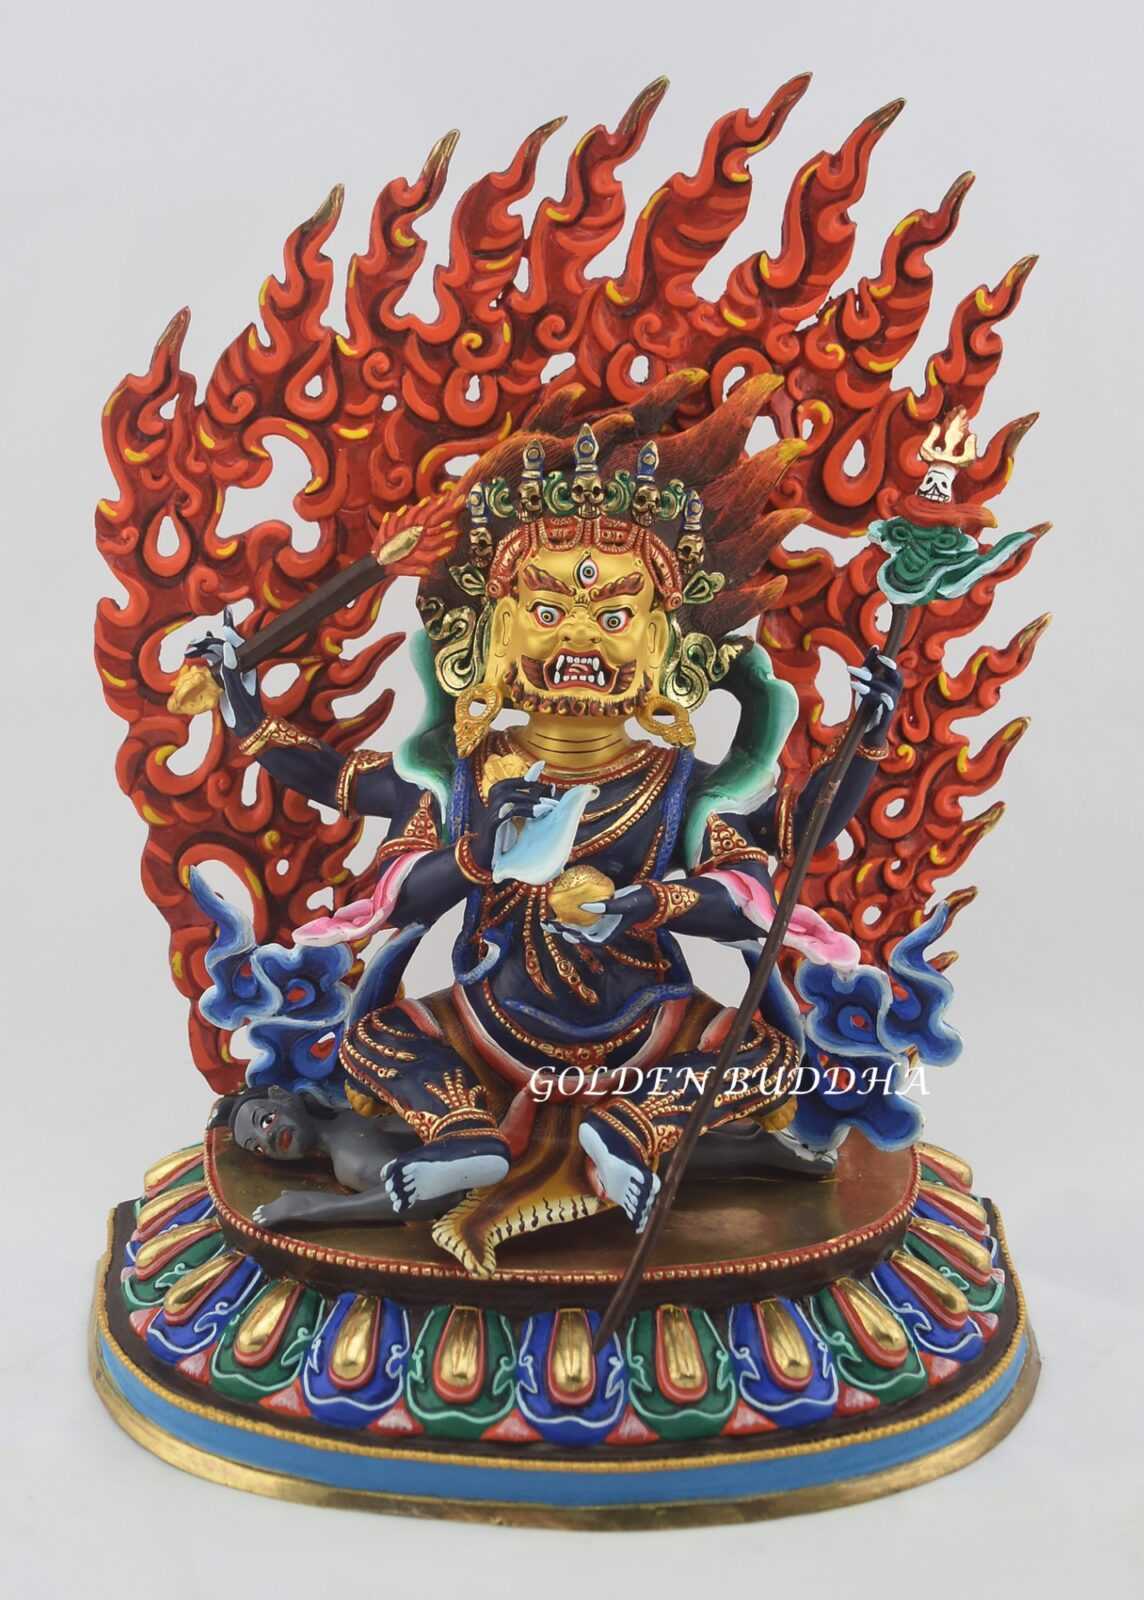 Partly Gold Gilded Multicolored 13.5" Chuchepa Mahakala Sculpture, Hand Painted - Gallery